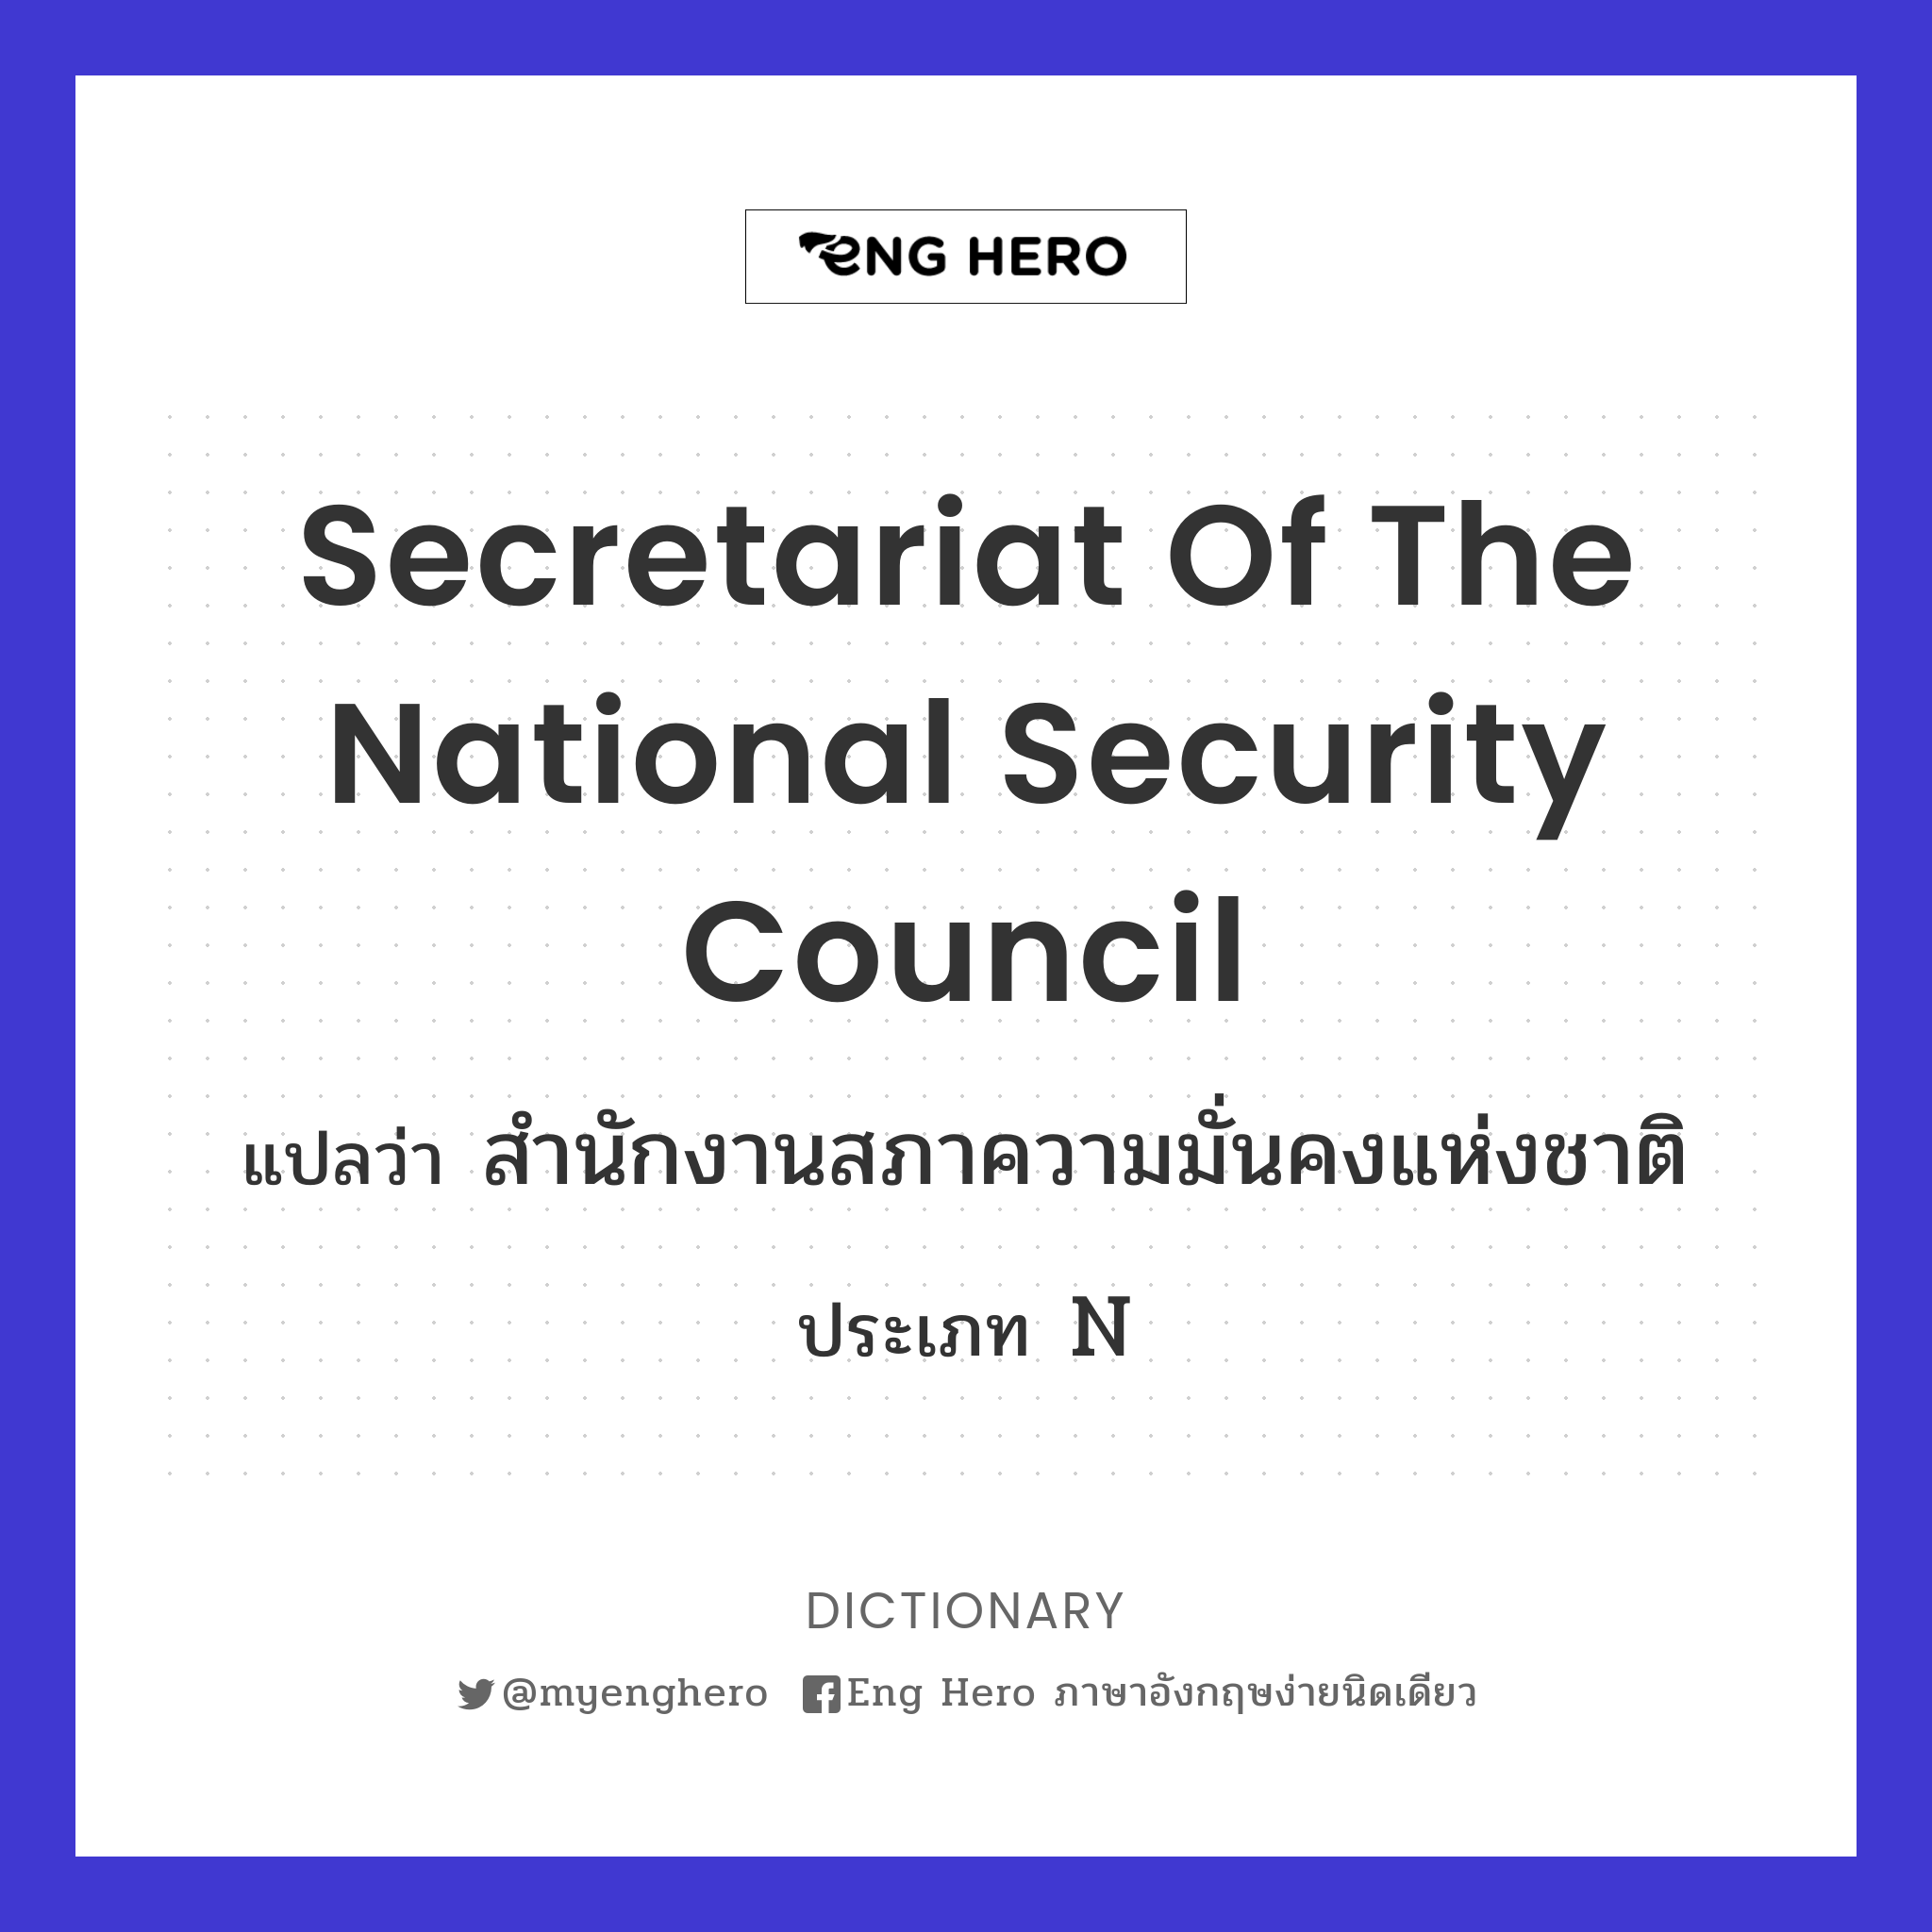 Secretariat of the National Security Council